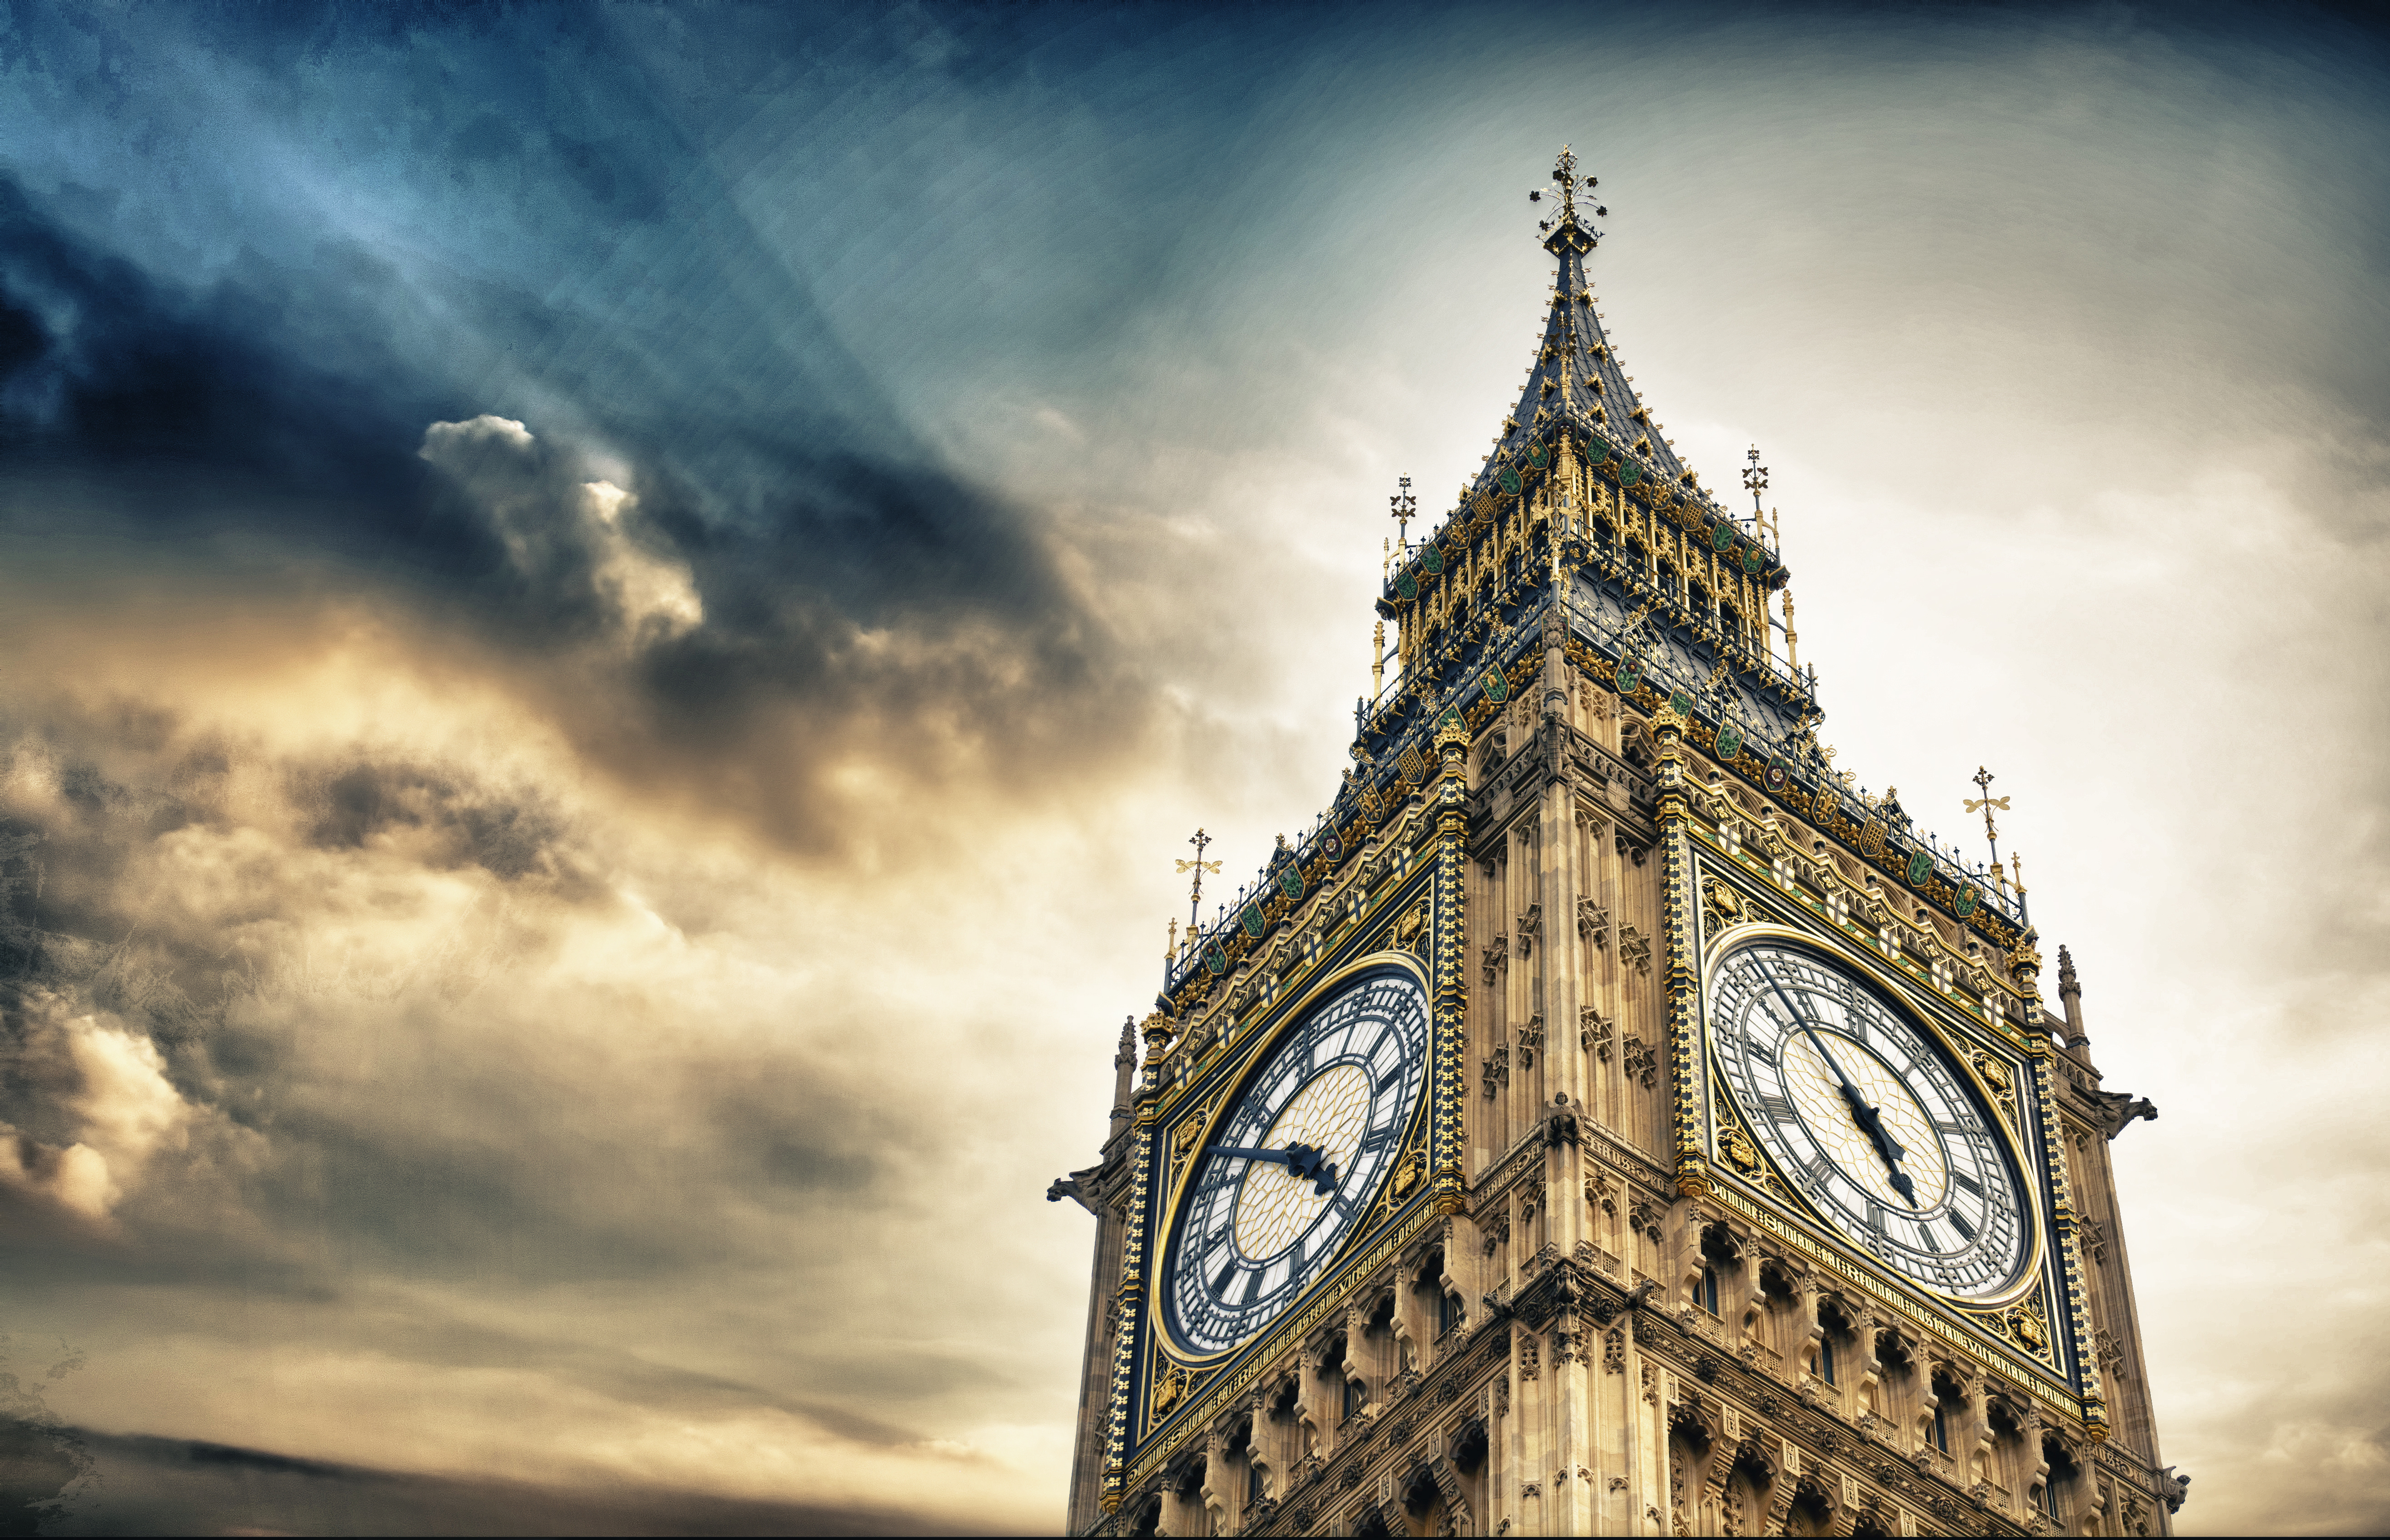 Is It Right To Silence Big Ben For Workers Hearing